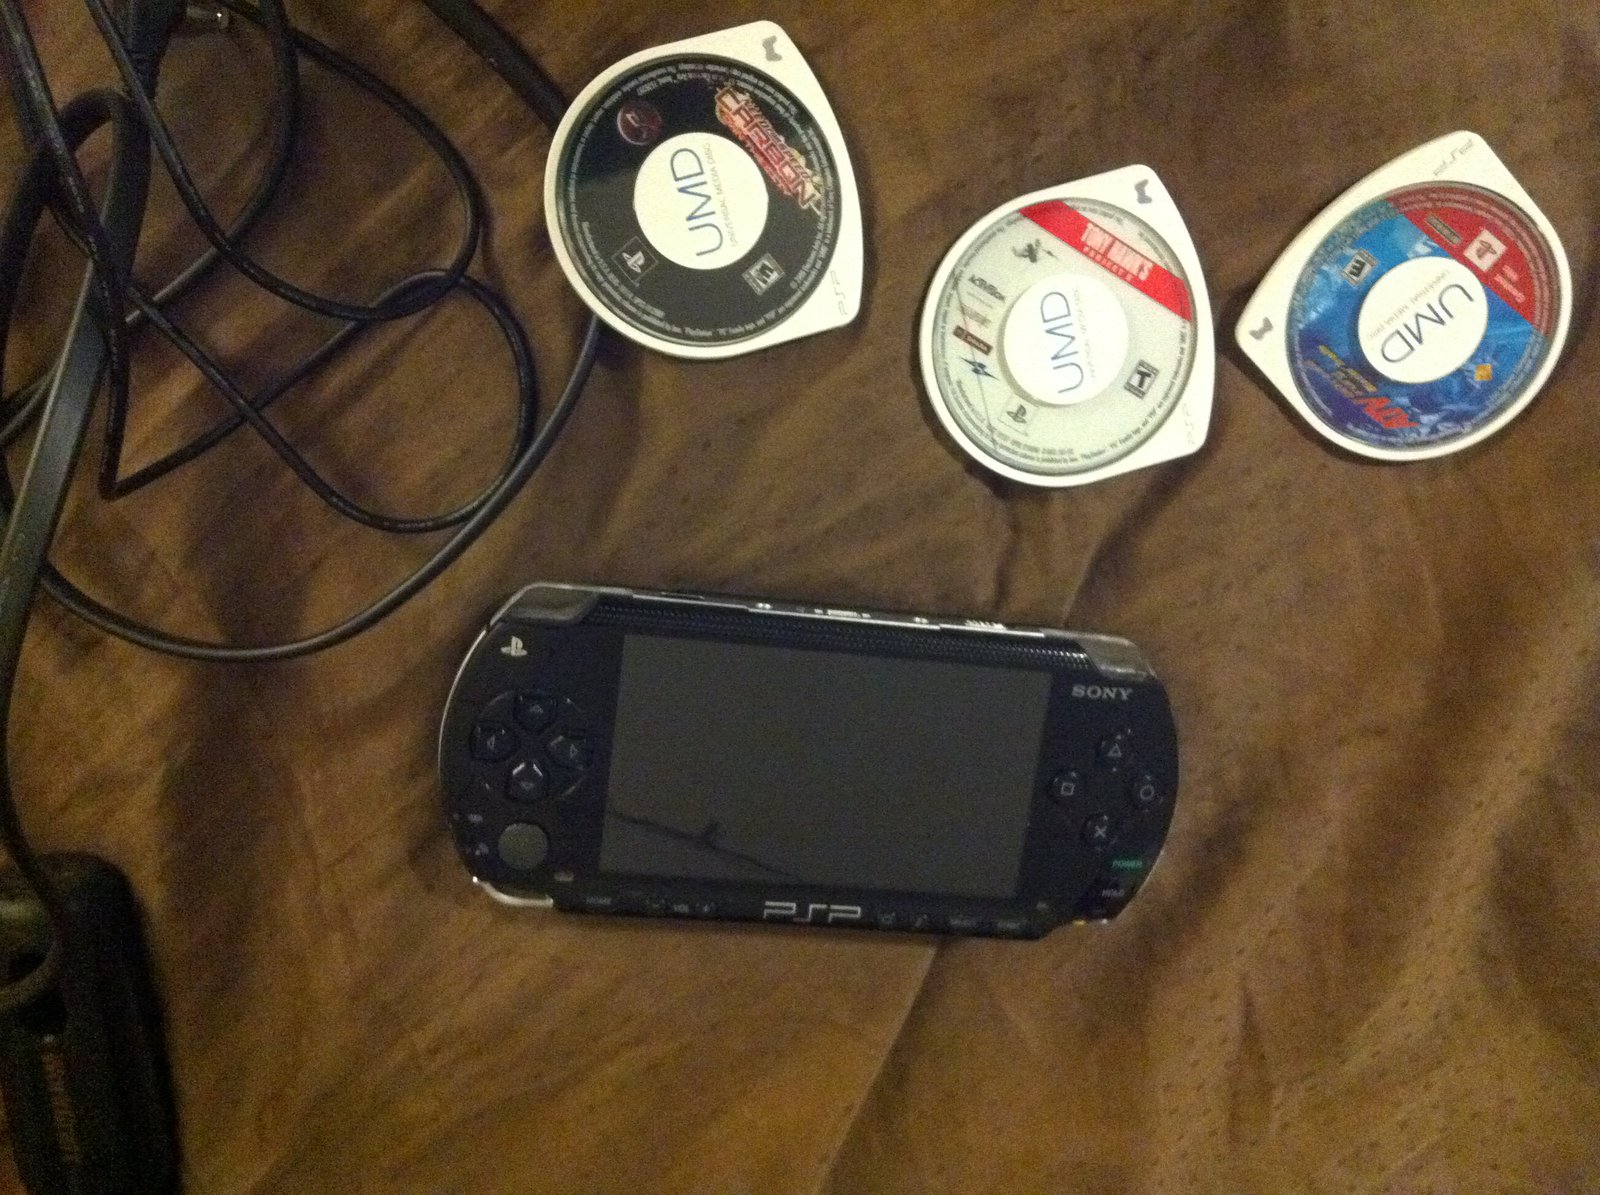 Psp and games